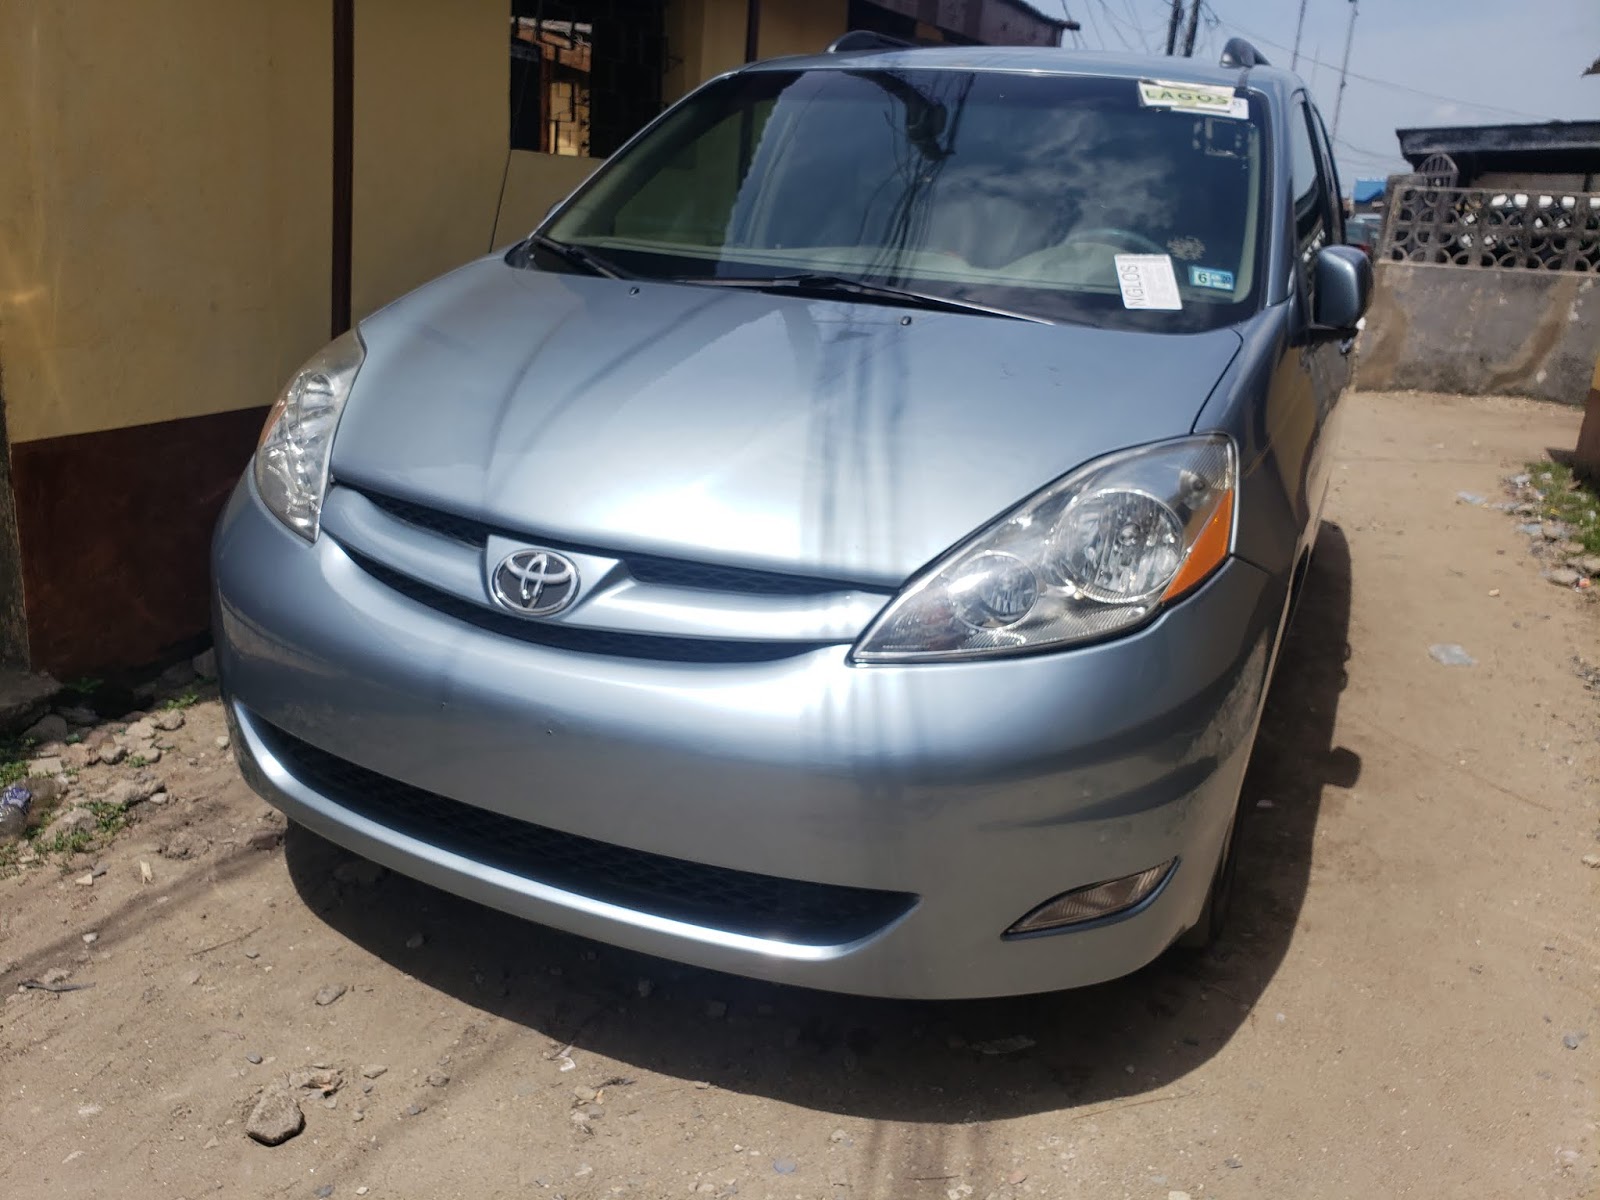 scrollfieldent: 2009 Toyota Sienna call for details:08055227660